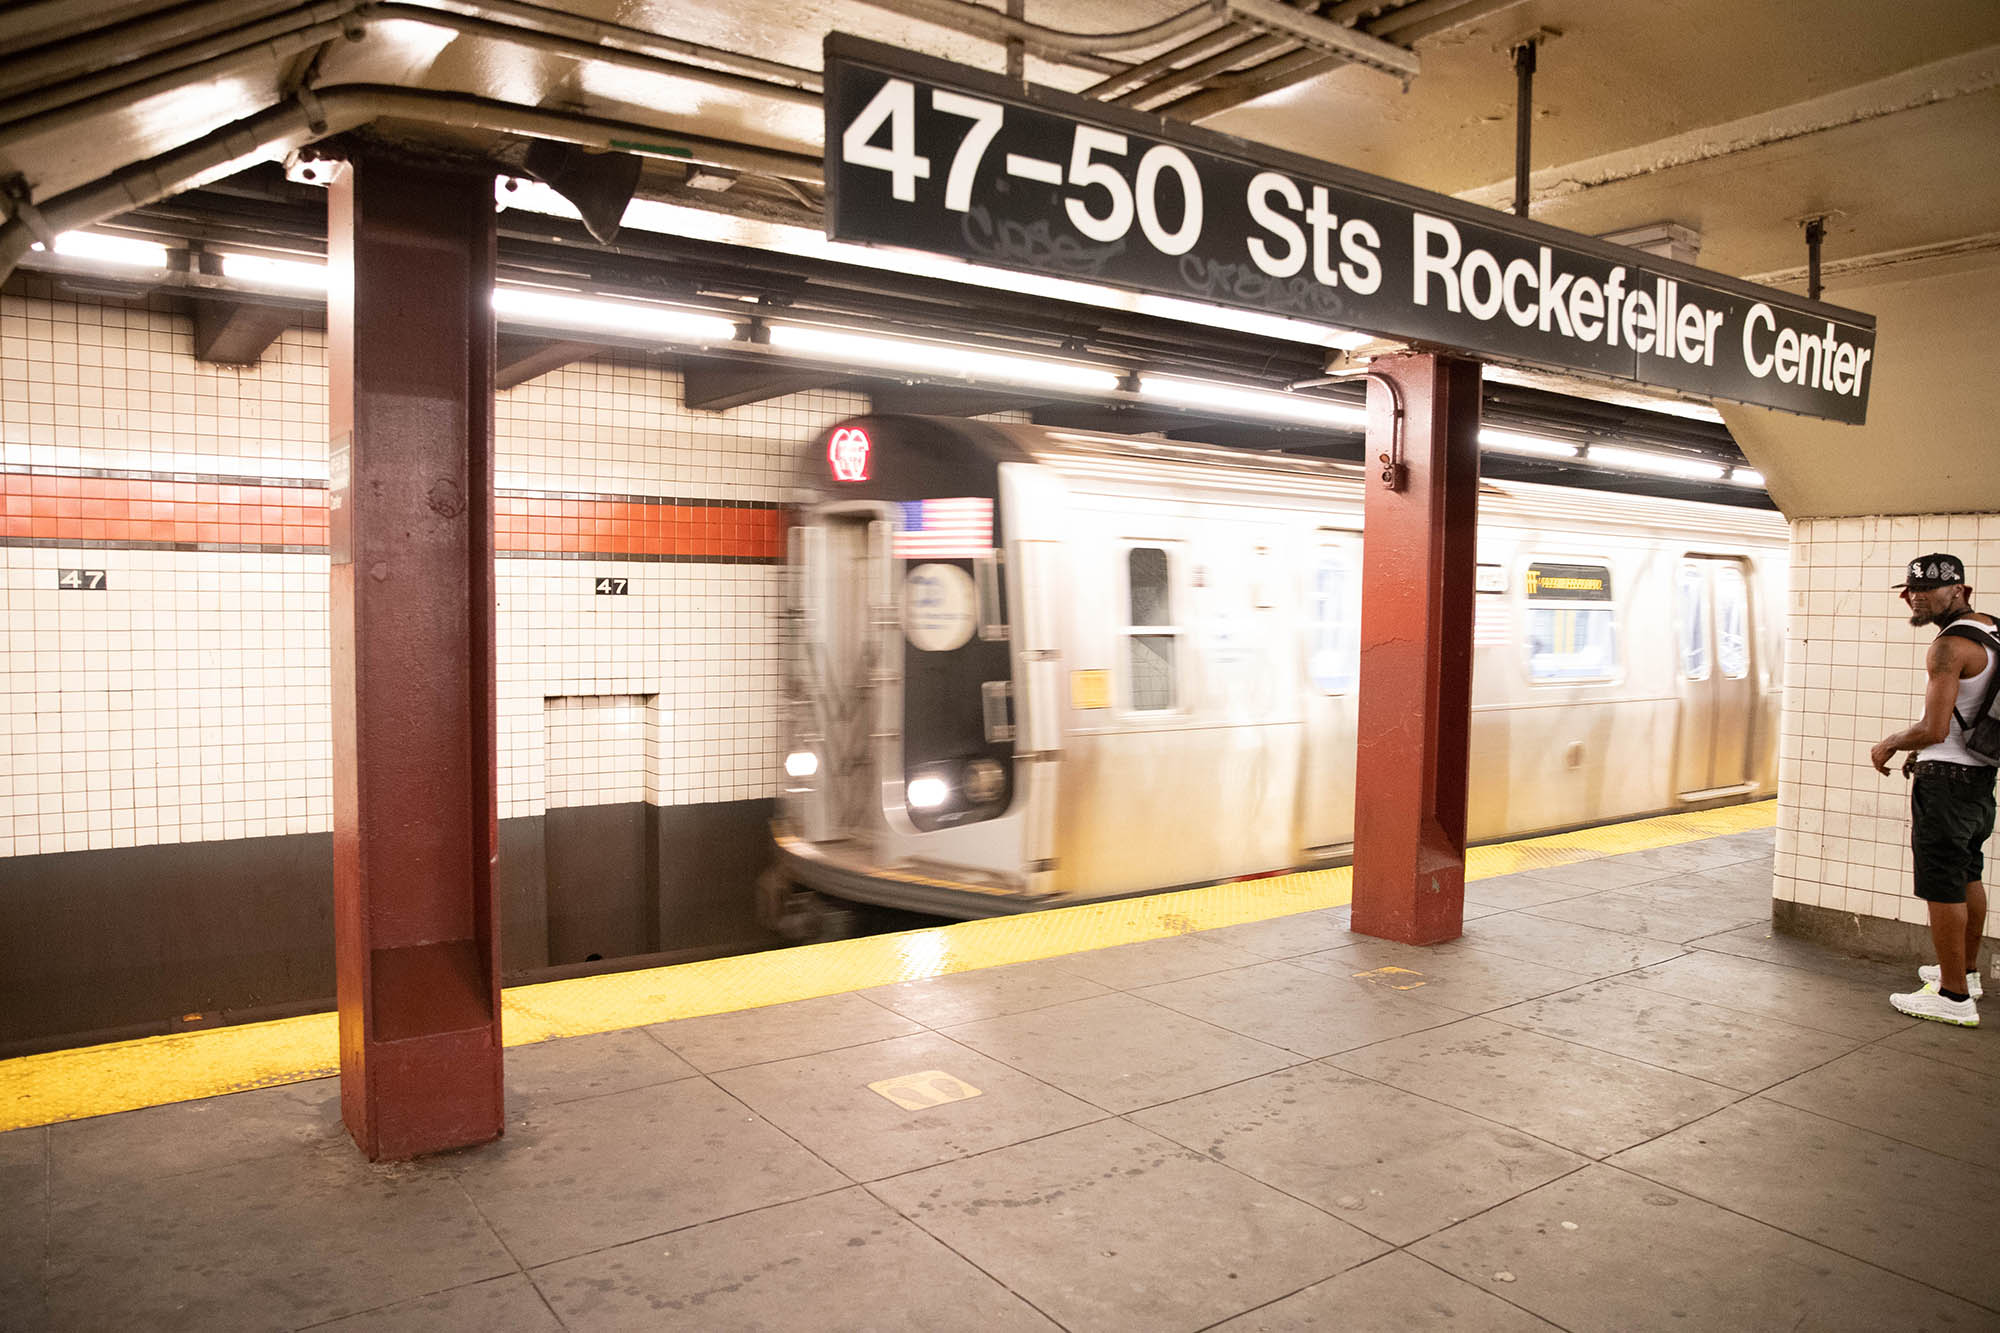 This is the Rockefeller Center station in Manhattan, where a man was stabbed early Monday.